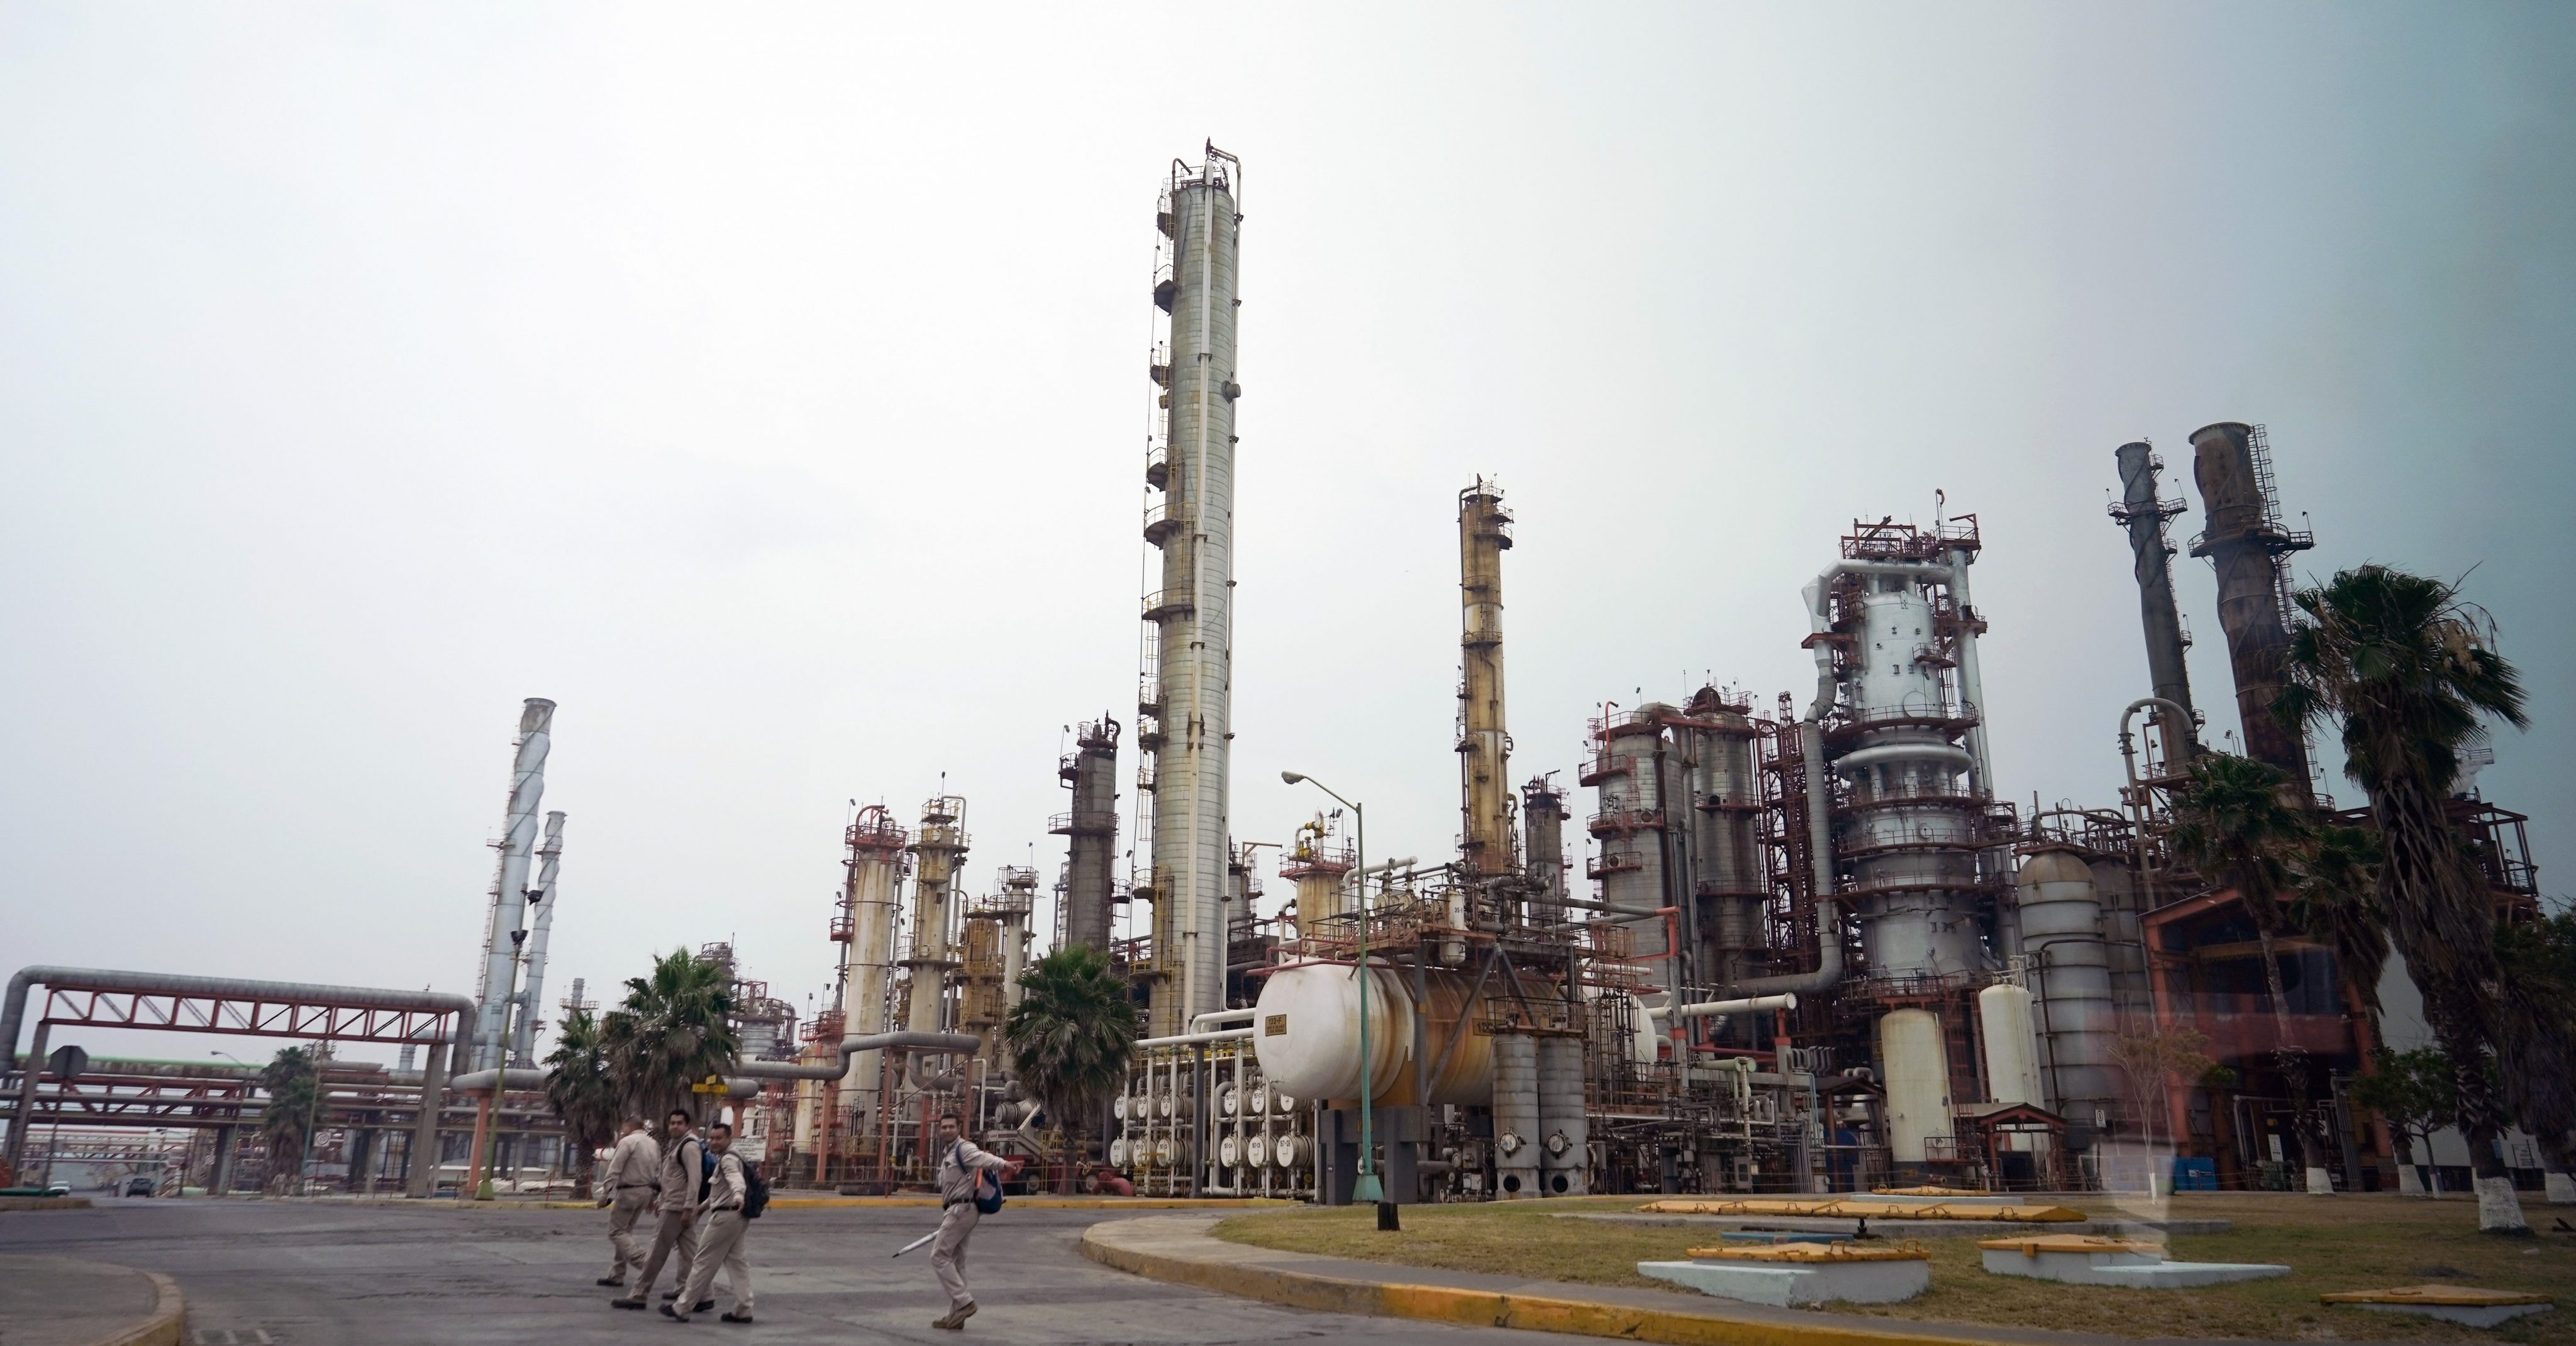 Alert for the financial risks of the two-mouth refinery